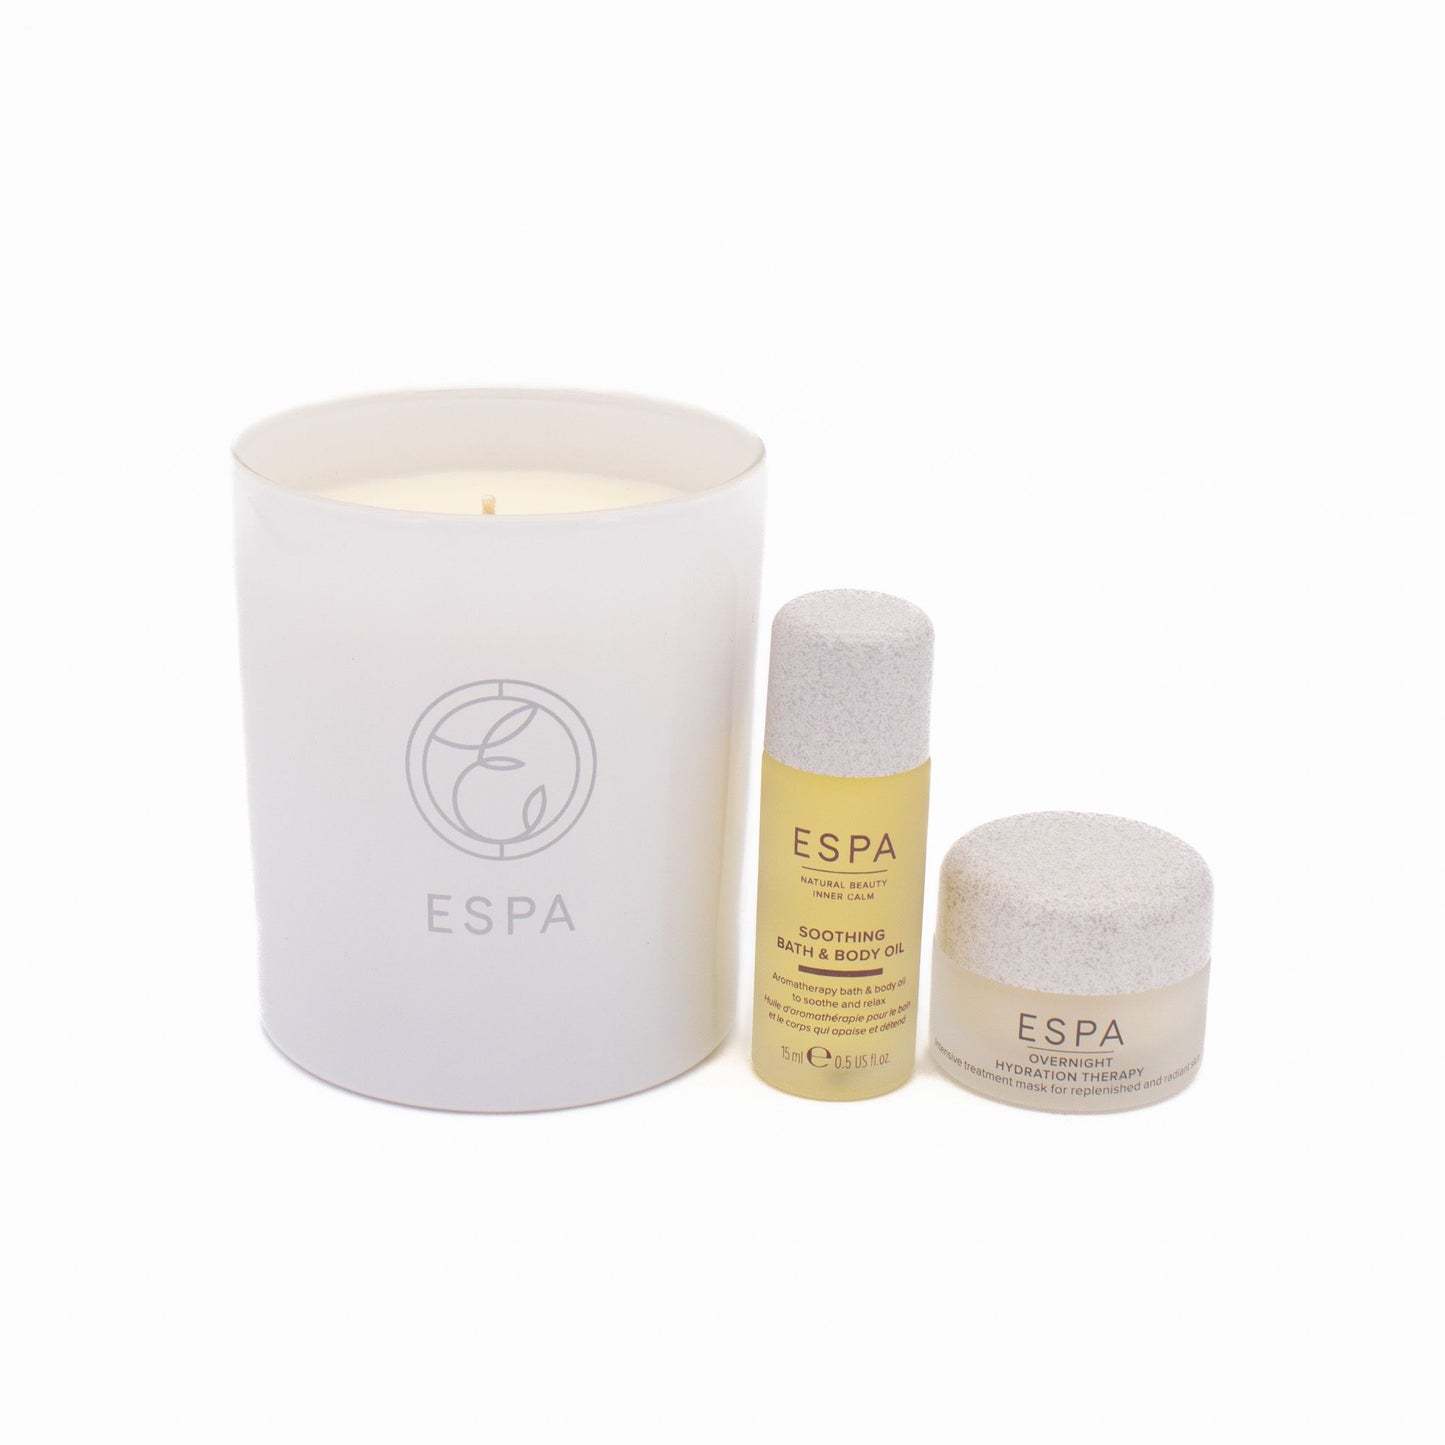 ESPA Soothing Collection 3 Piece Set - Imperfect Box